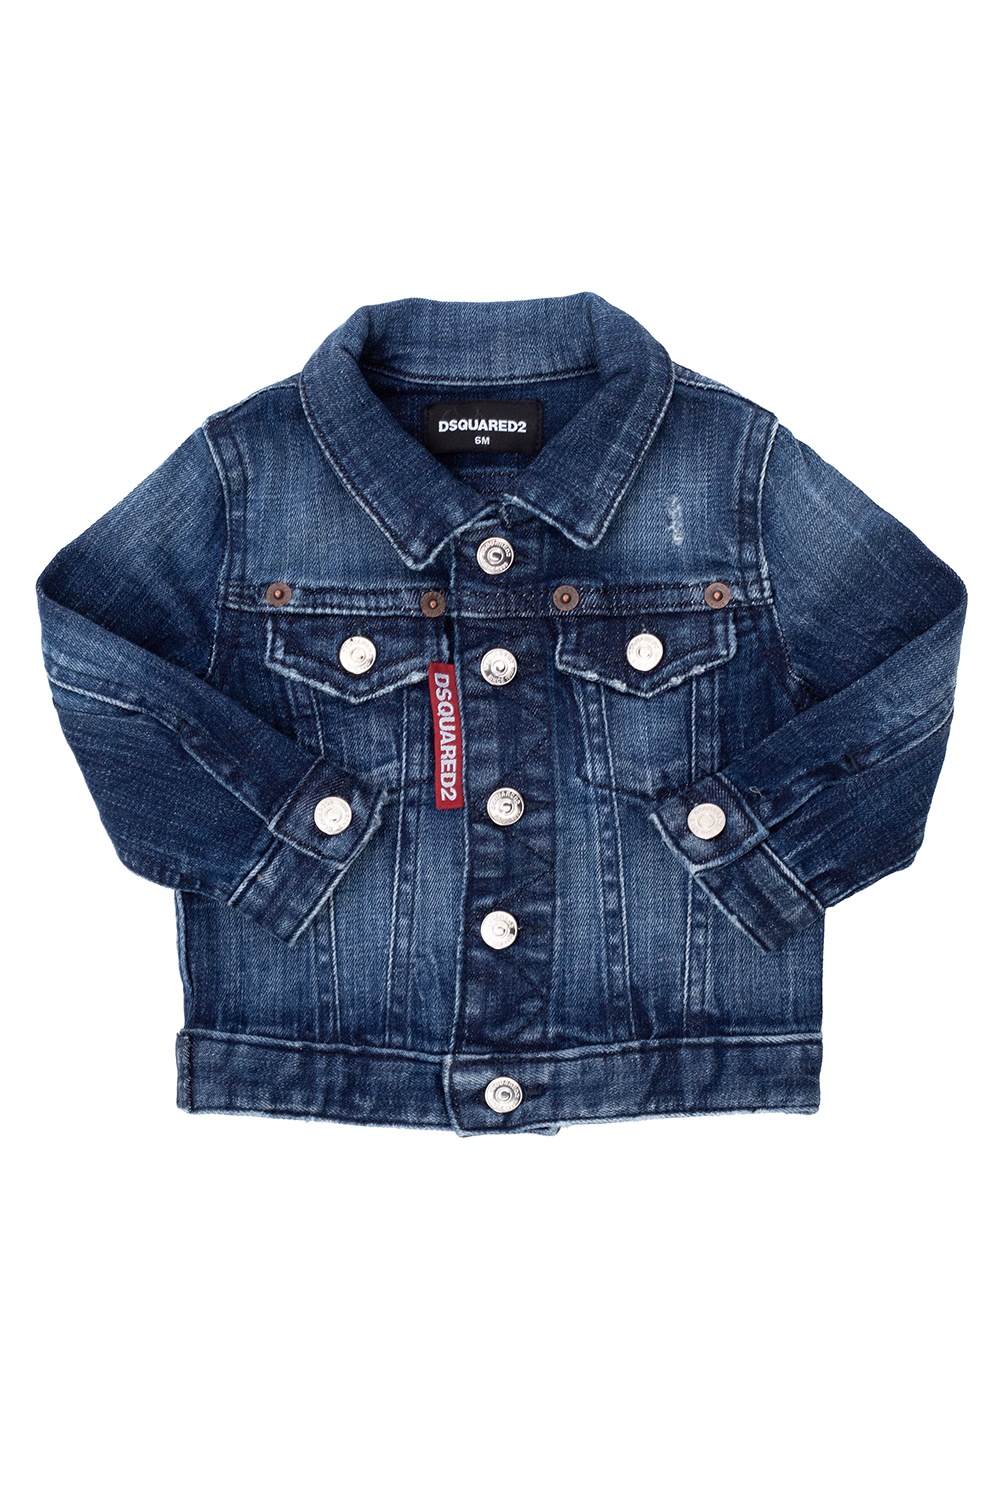 dsquared kids size guide